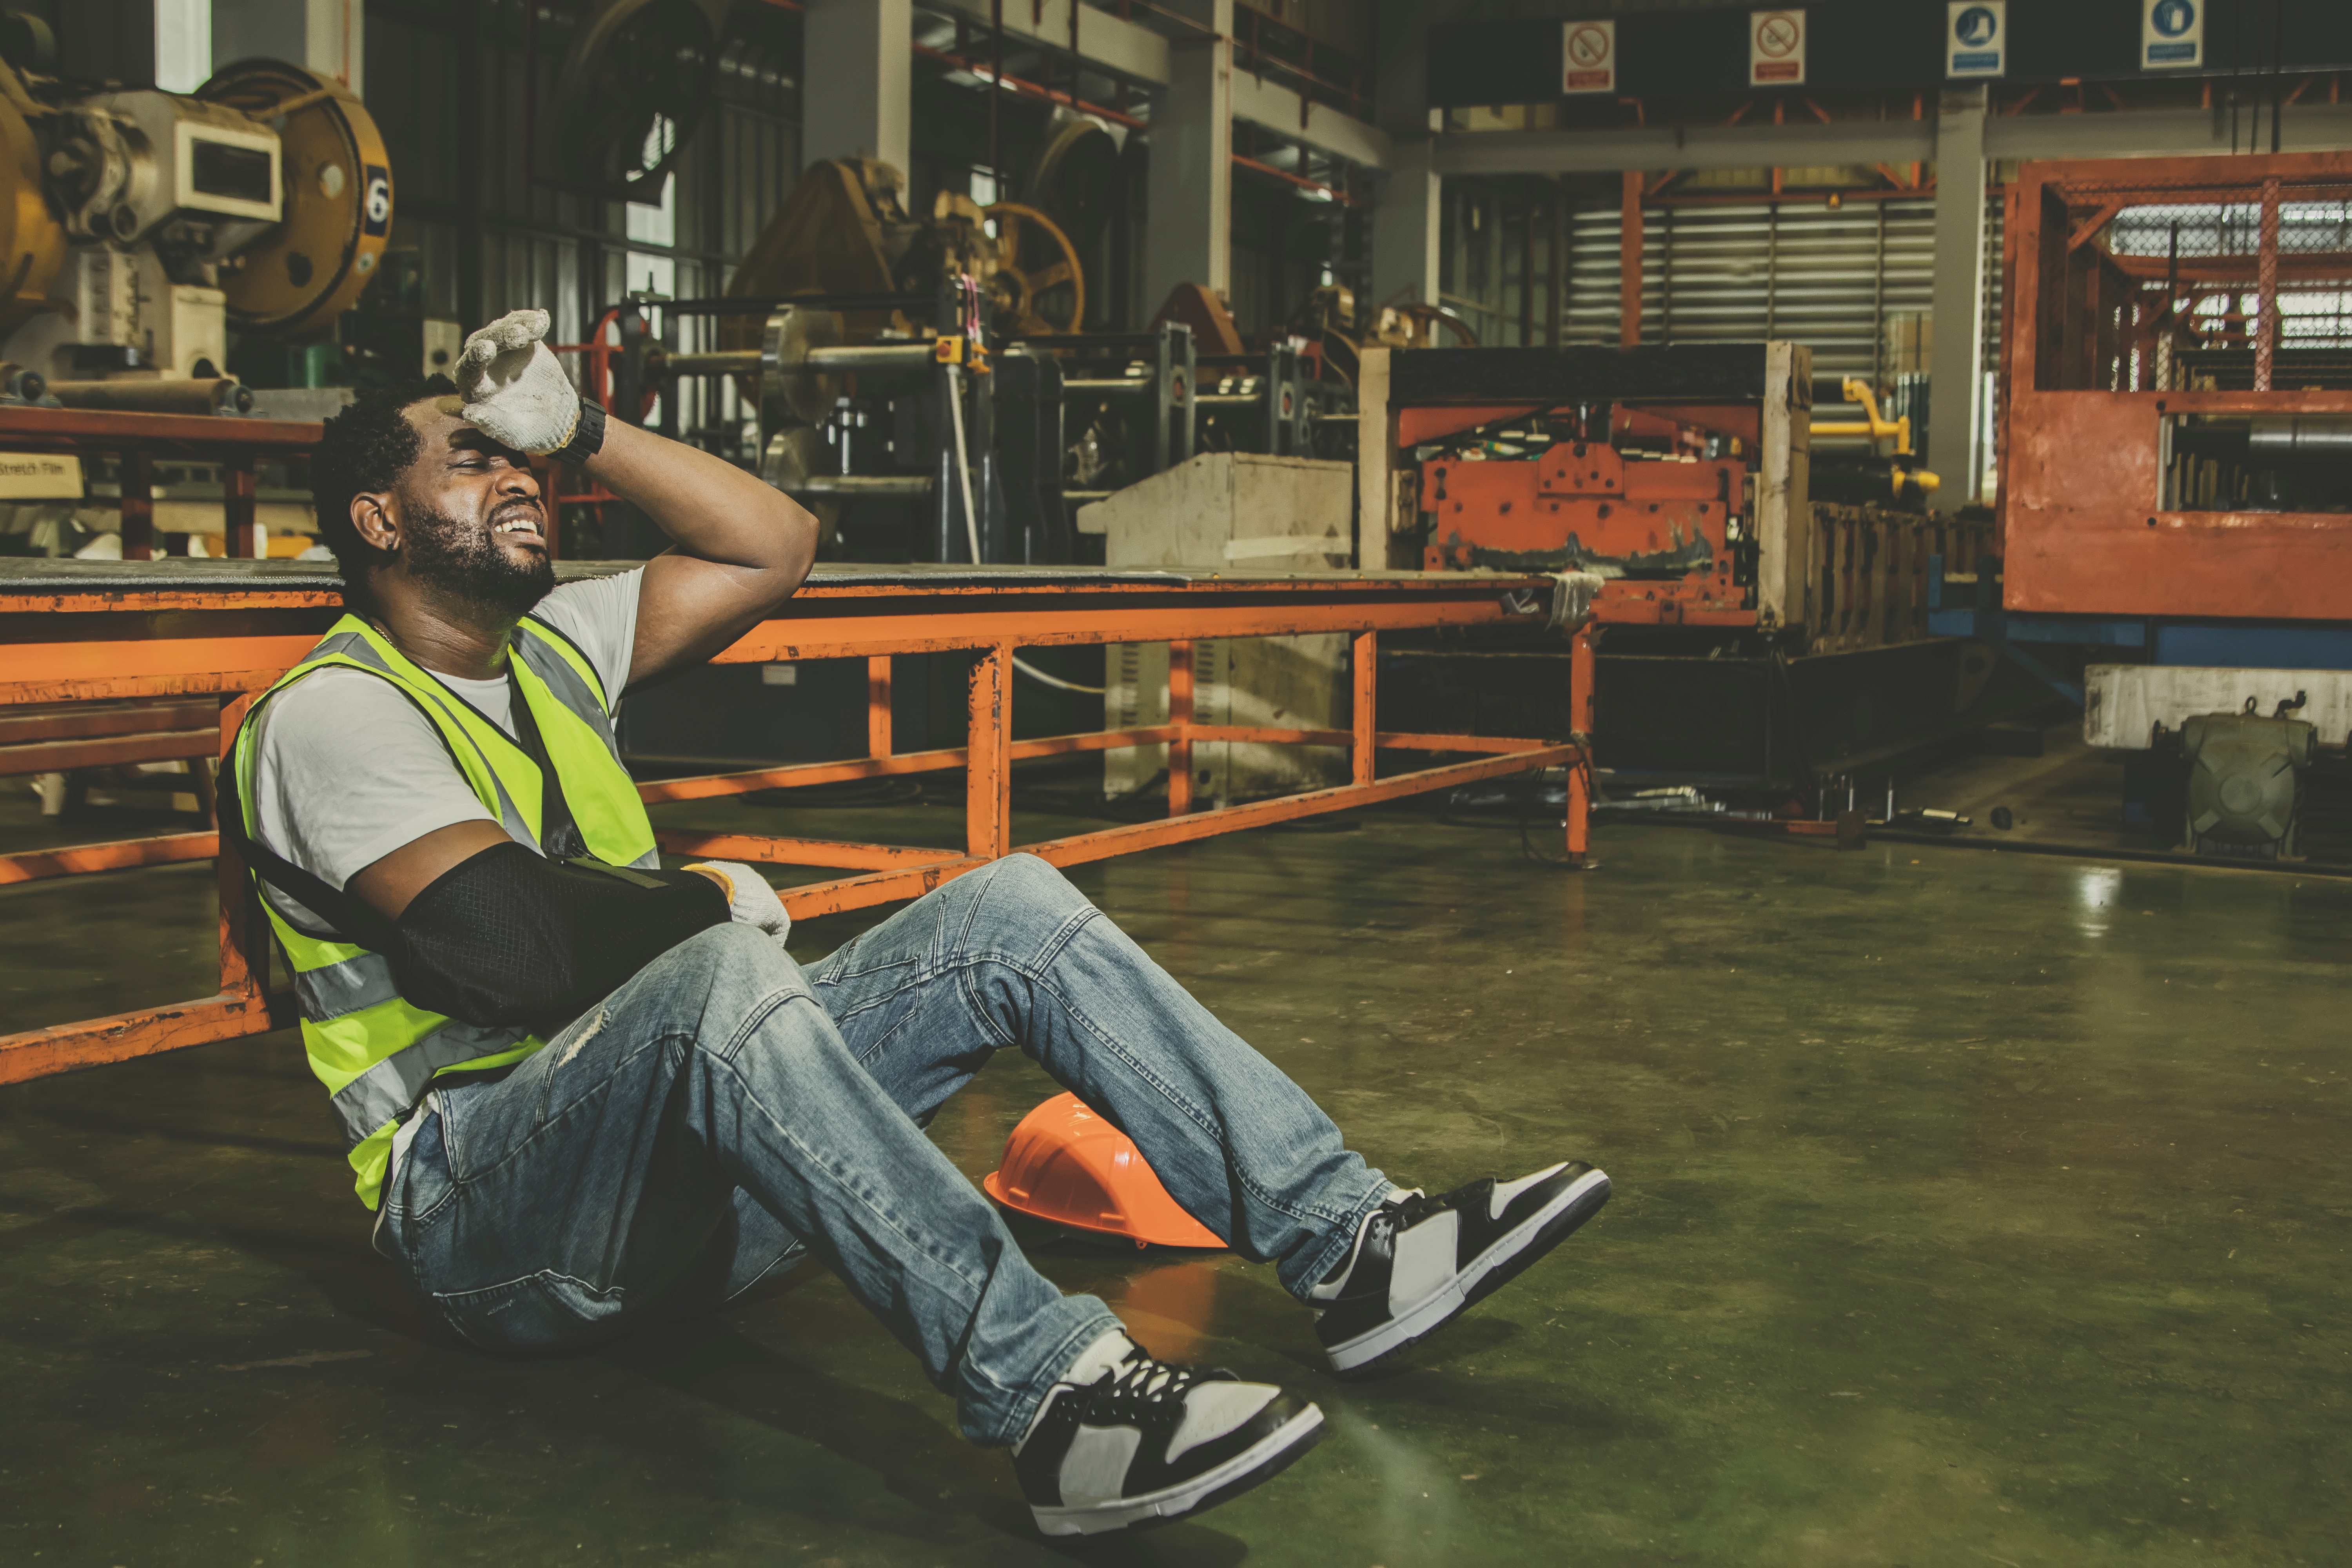 A factory worker sitting on the ground | Source: Shutterstock